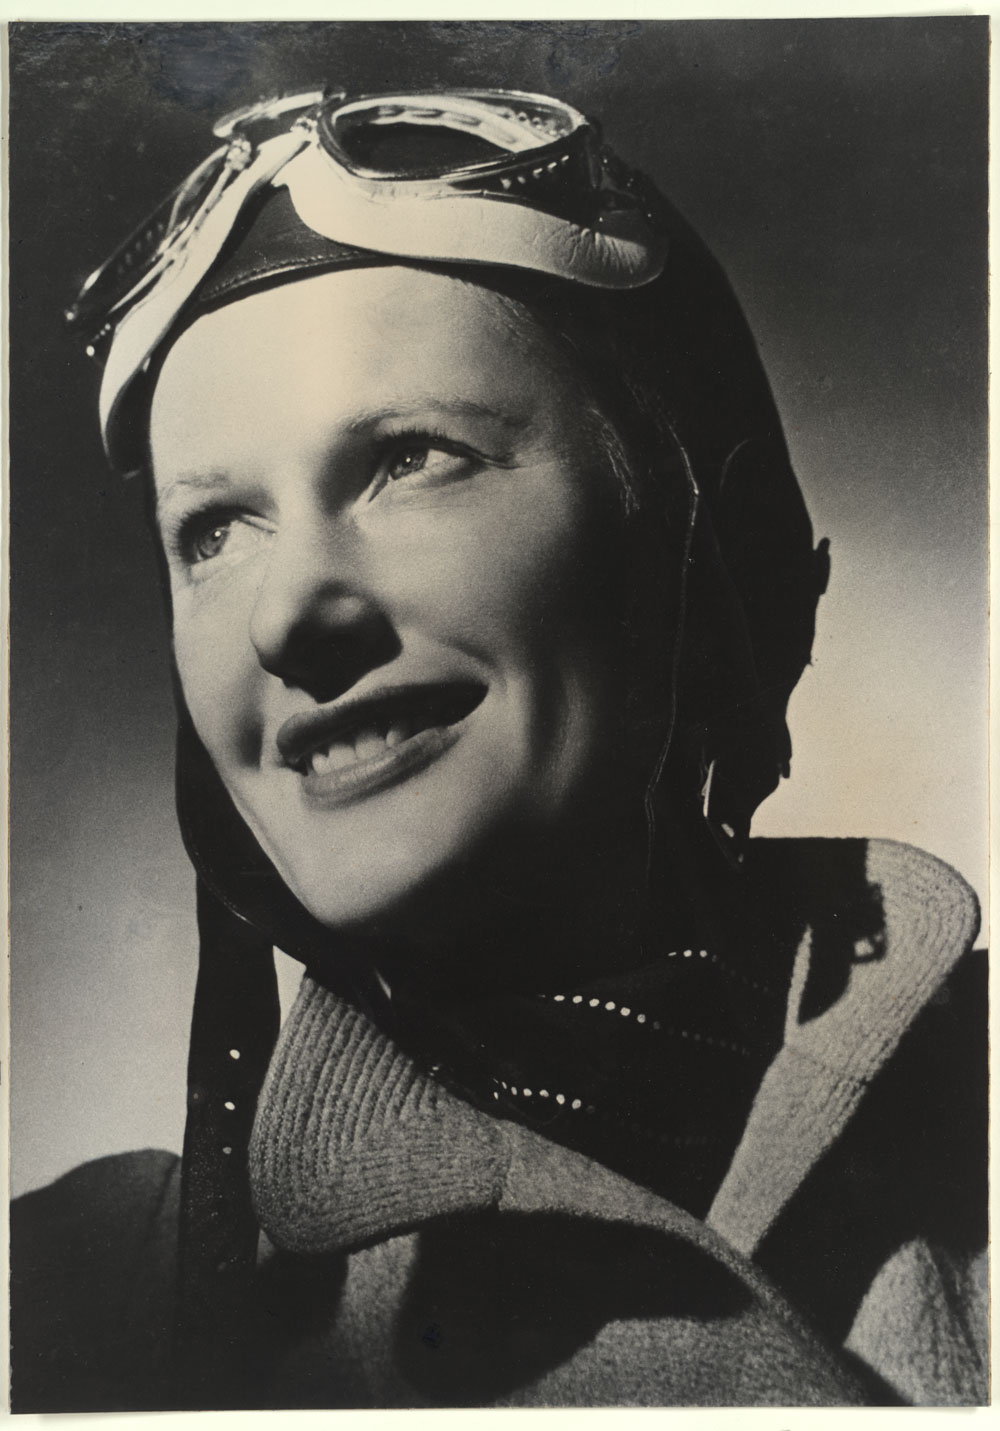 Formal posed black-and-white photo of Nancy Bird Walton wearing an aviation cap, with goggles pushed up over her forehead. She is dressed in a thick jacket.